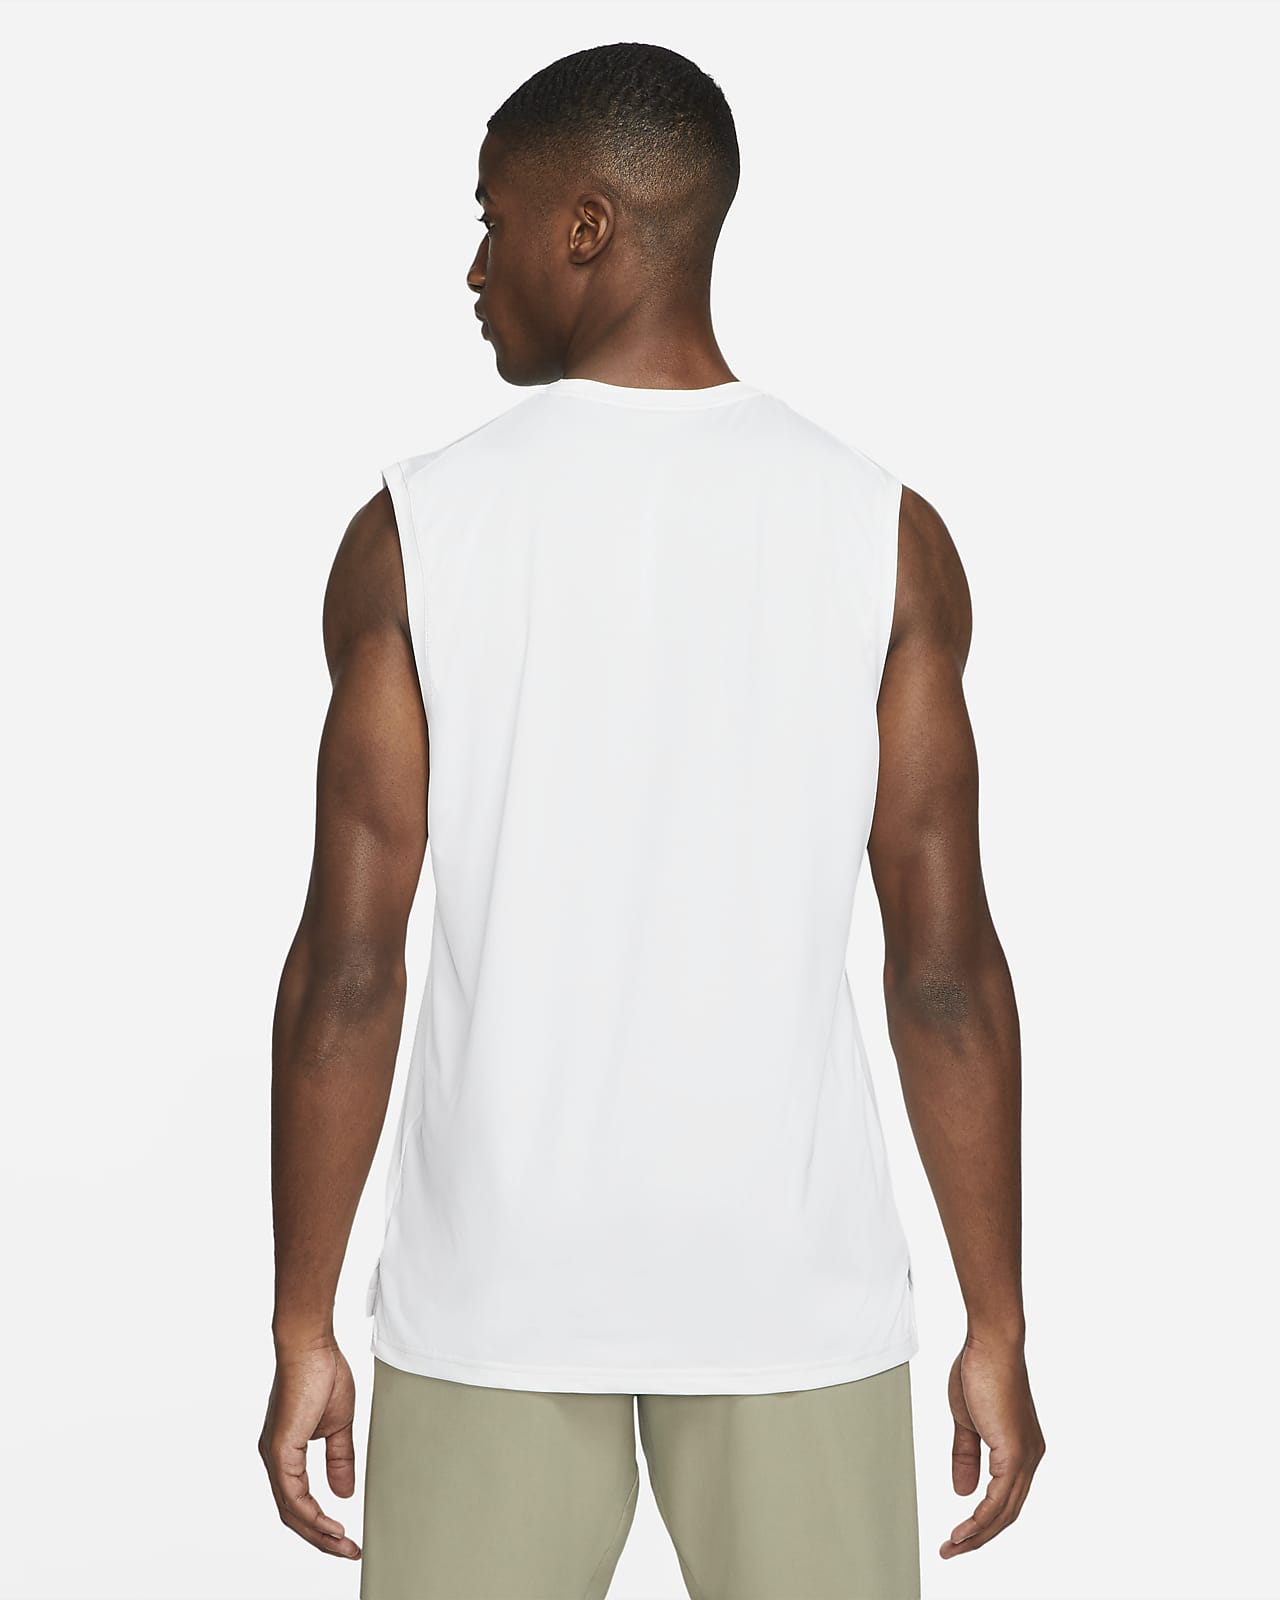 Check out Nike Pro Compression Top - 838085-100 - by Nike in  white / black in Sleeveless - Men - T-Shirts - Clothing - Sleeveless,  FITNESS/WORKOUT, at .